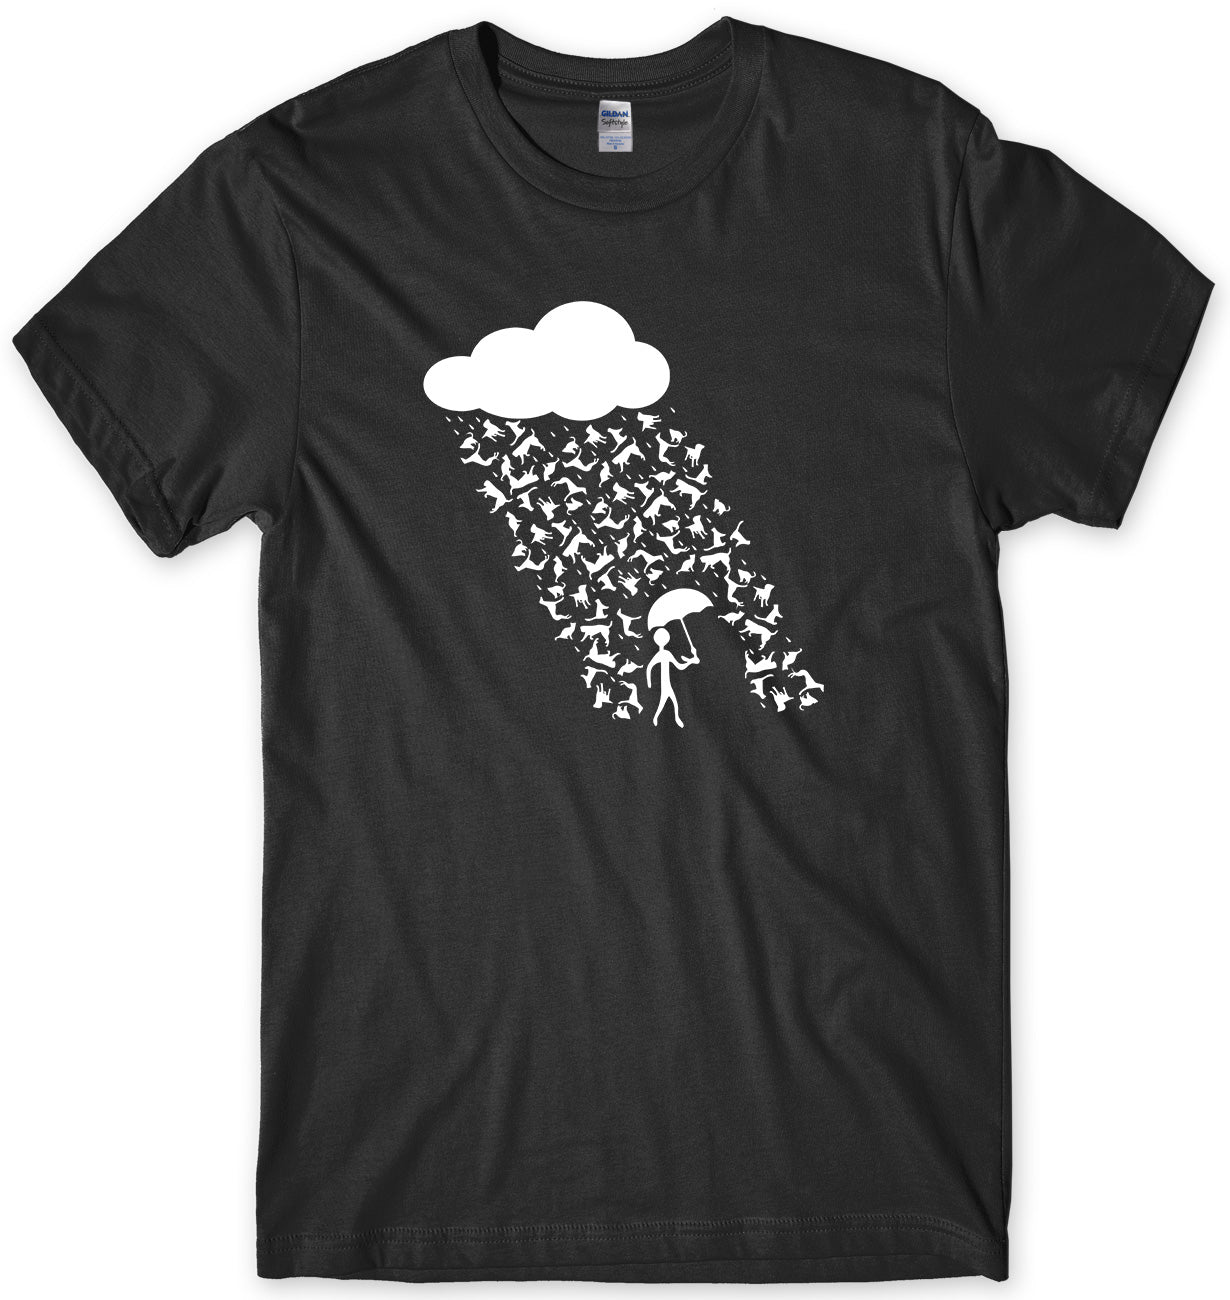 RAINING CATS AND DOGS MENS FUNNY UNISEX T-SHIRT